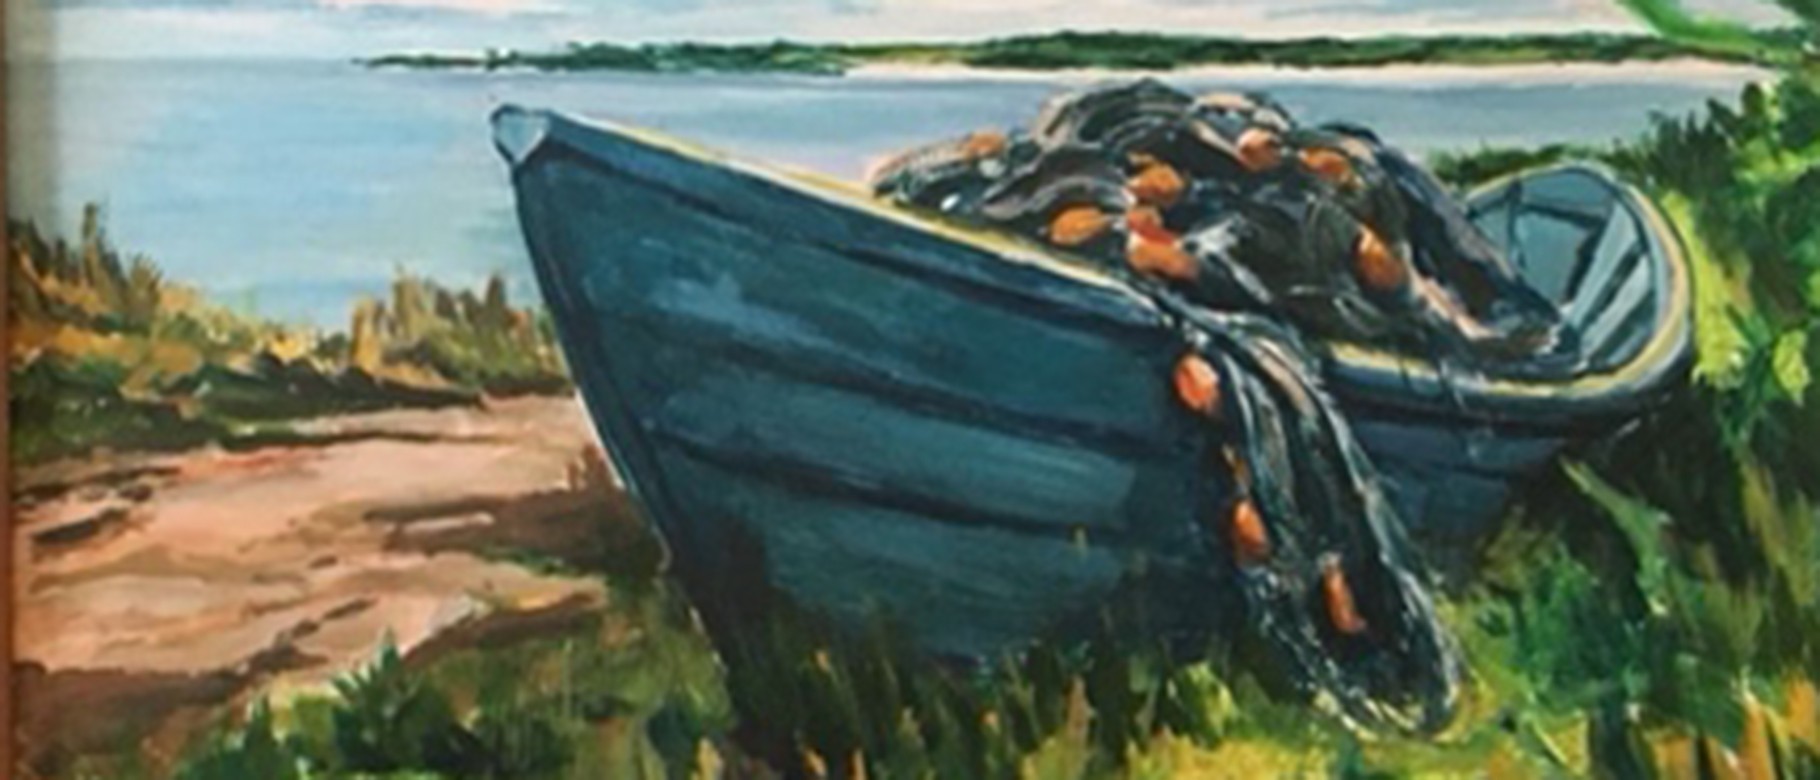 Painting of a small fishing boat on a beach